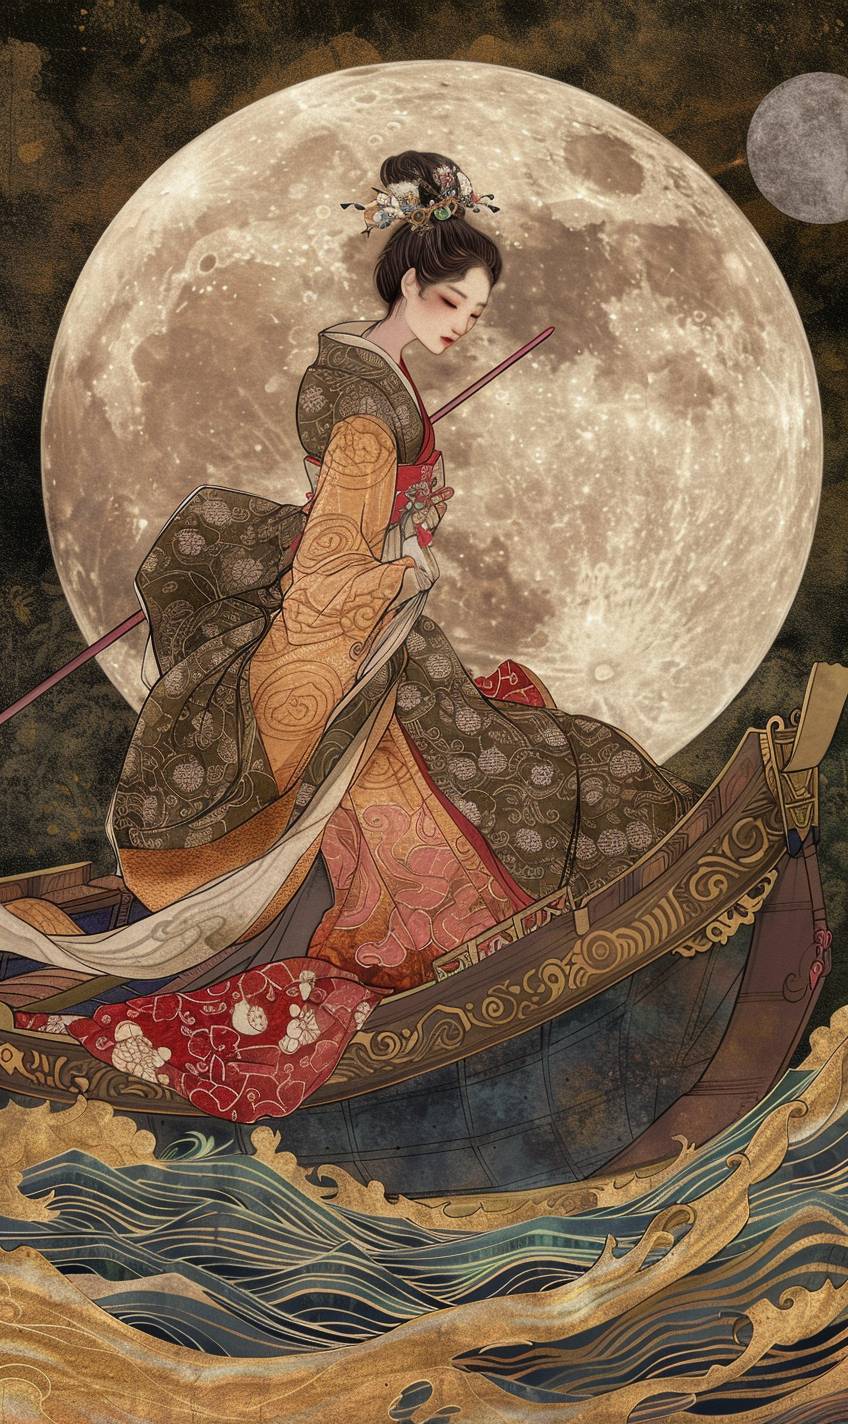 In the style of Kitagawa Utamaro, a spacefarer embarking on voyages to uncharted realms --ar 3:5 --v 6.0